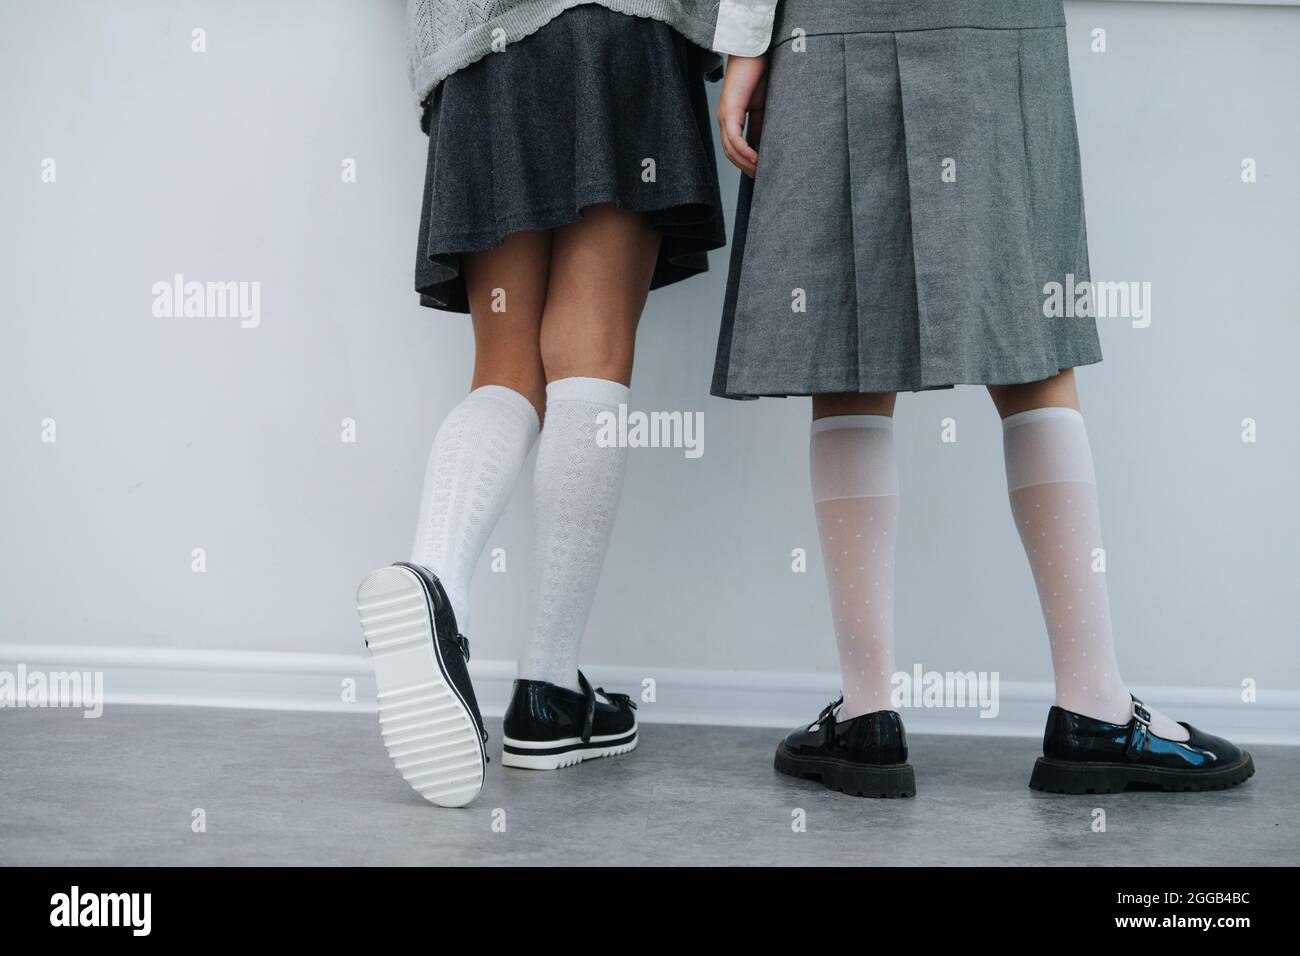 Legs of two schoolgirls stadning next to a wall close to one another. Both wearing skirts and knee-high socks. Stock Photo